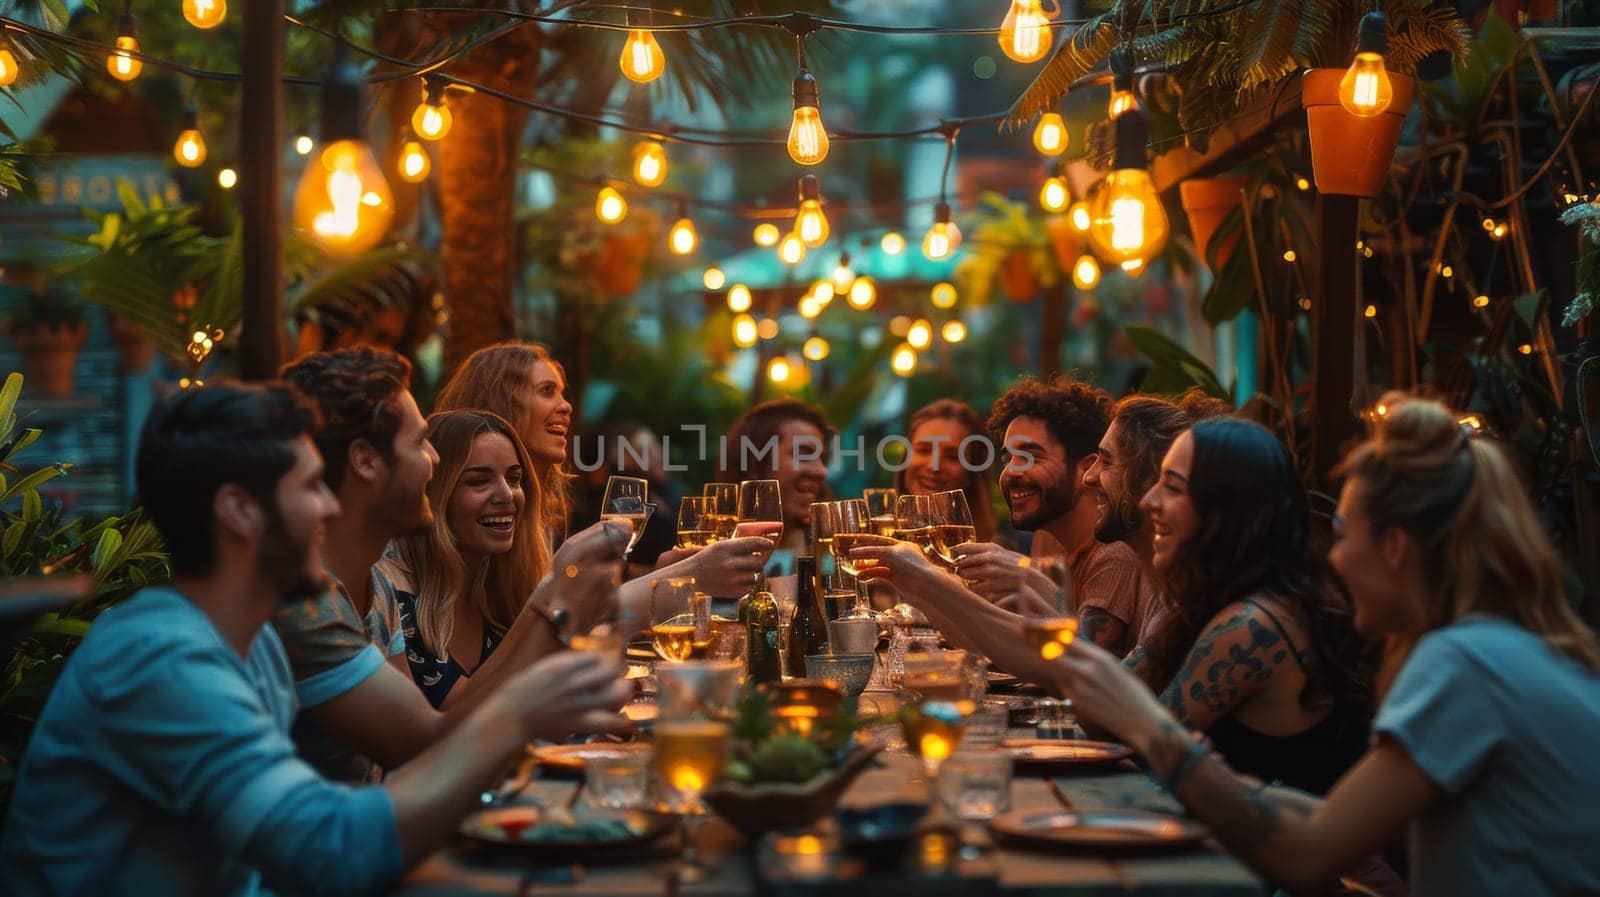 A group of people are gathered around a long table, enjoying a meal together. The atmosphere is lively and social, with everyone smiling and laughing. There are several wine glasses